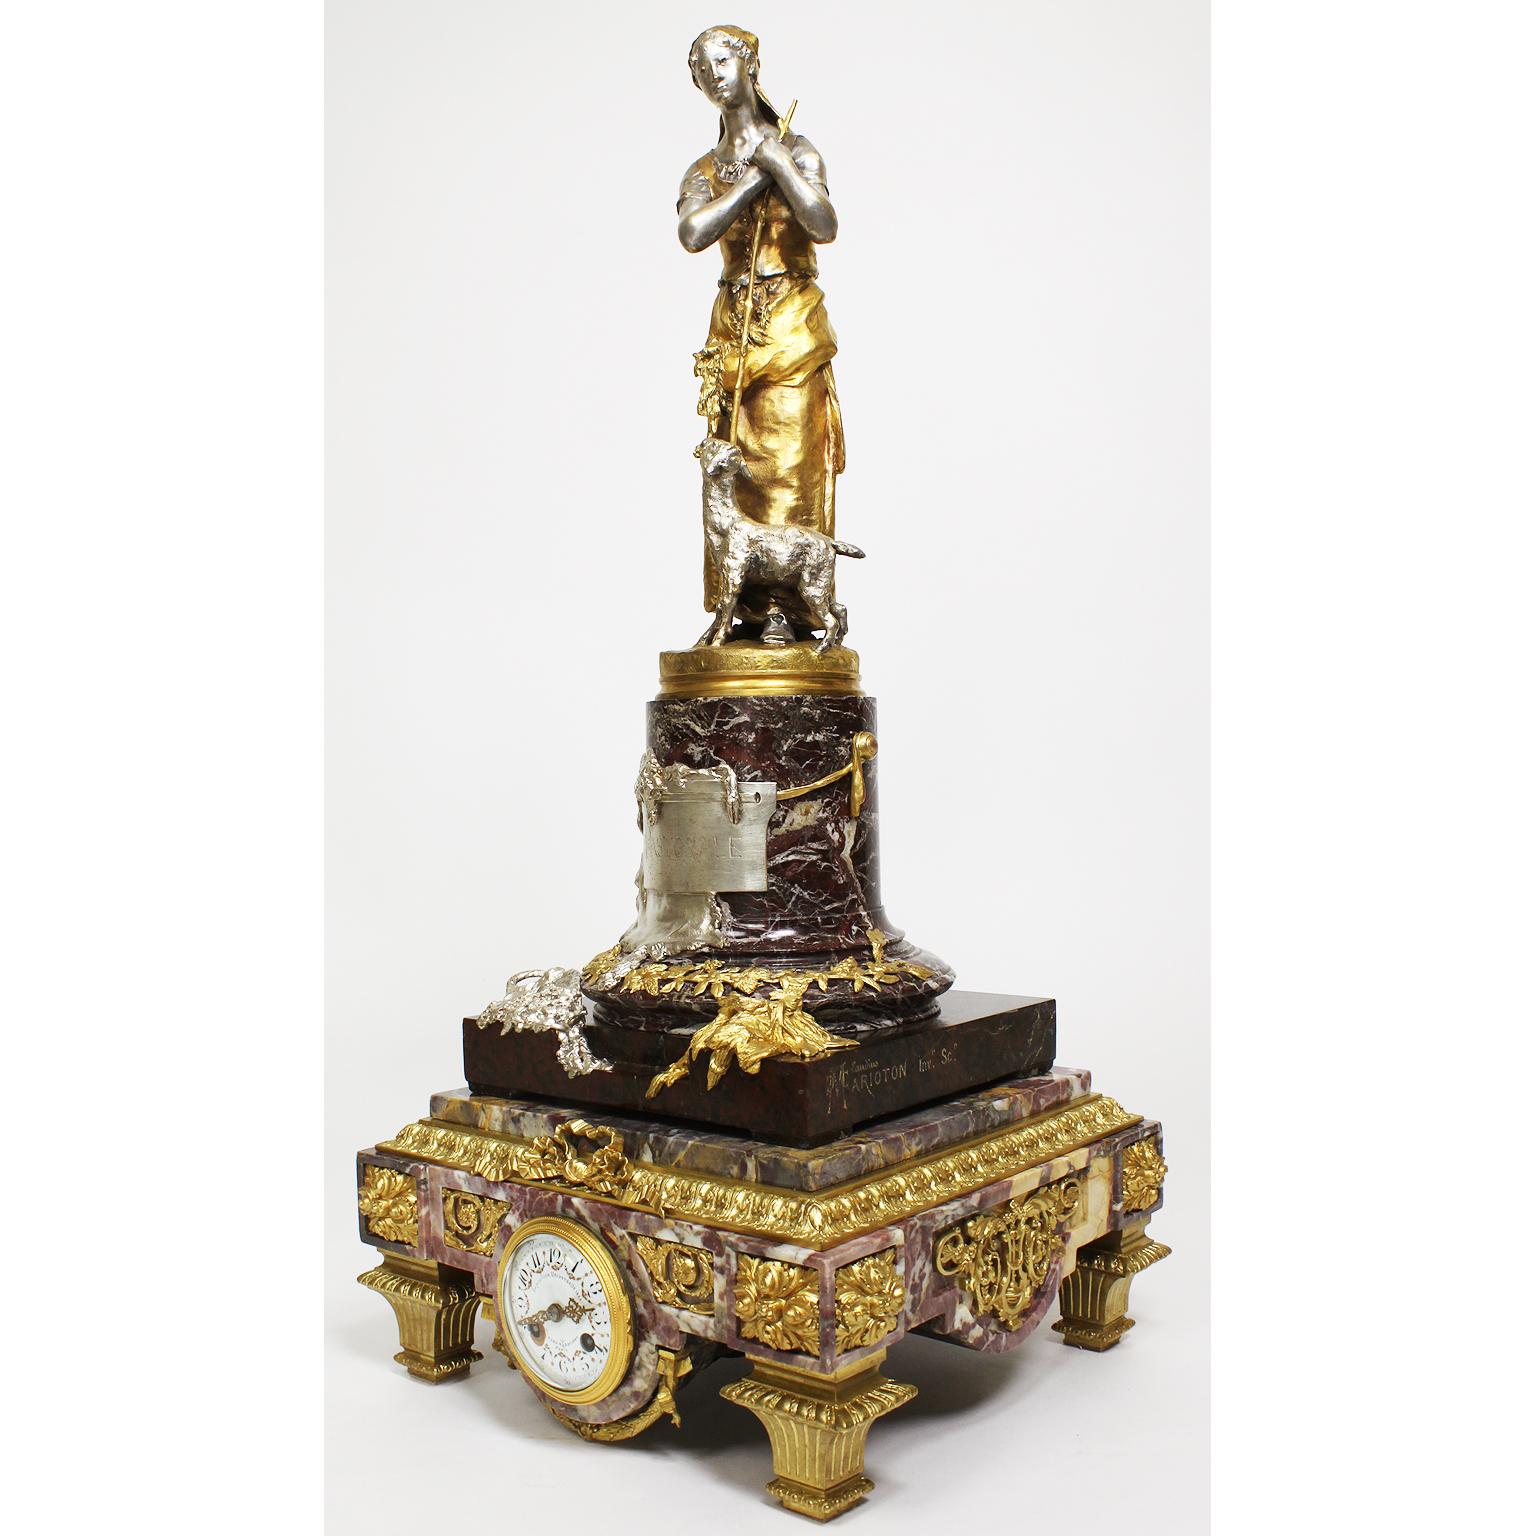 A very fine French 19th century Louis XV style gilt and silver plated bronze and two-tone marble figural mantel clock titled 